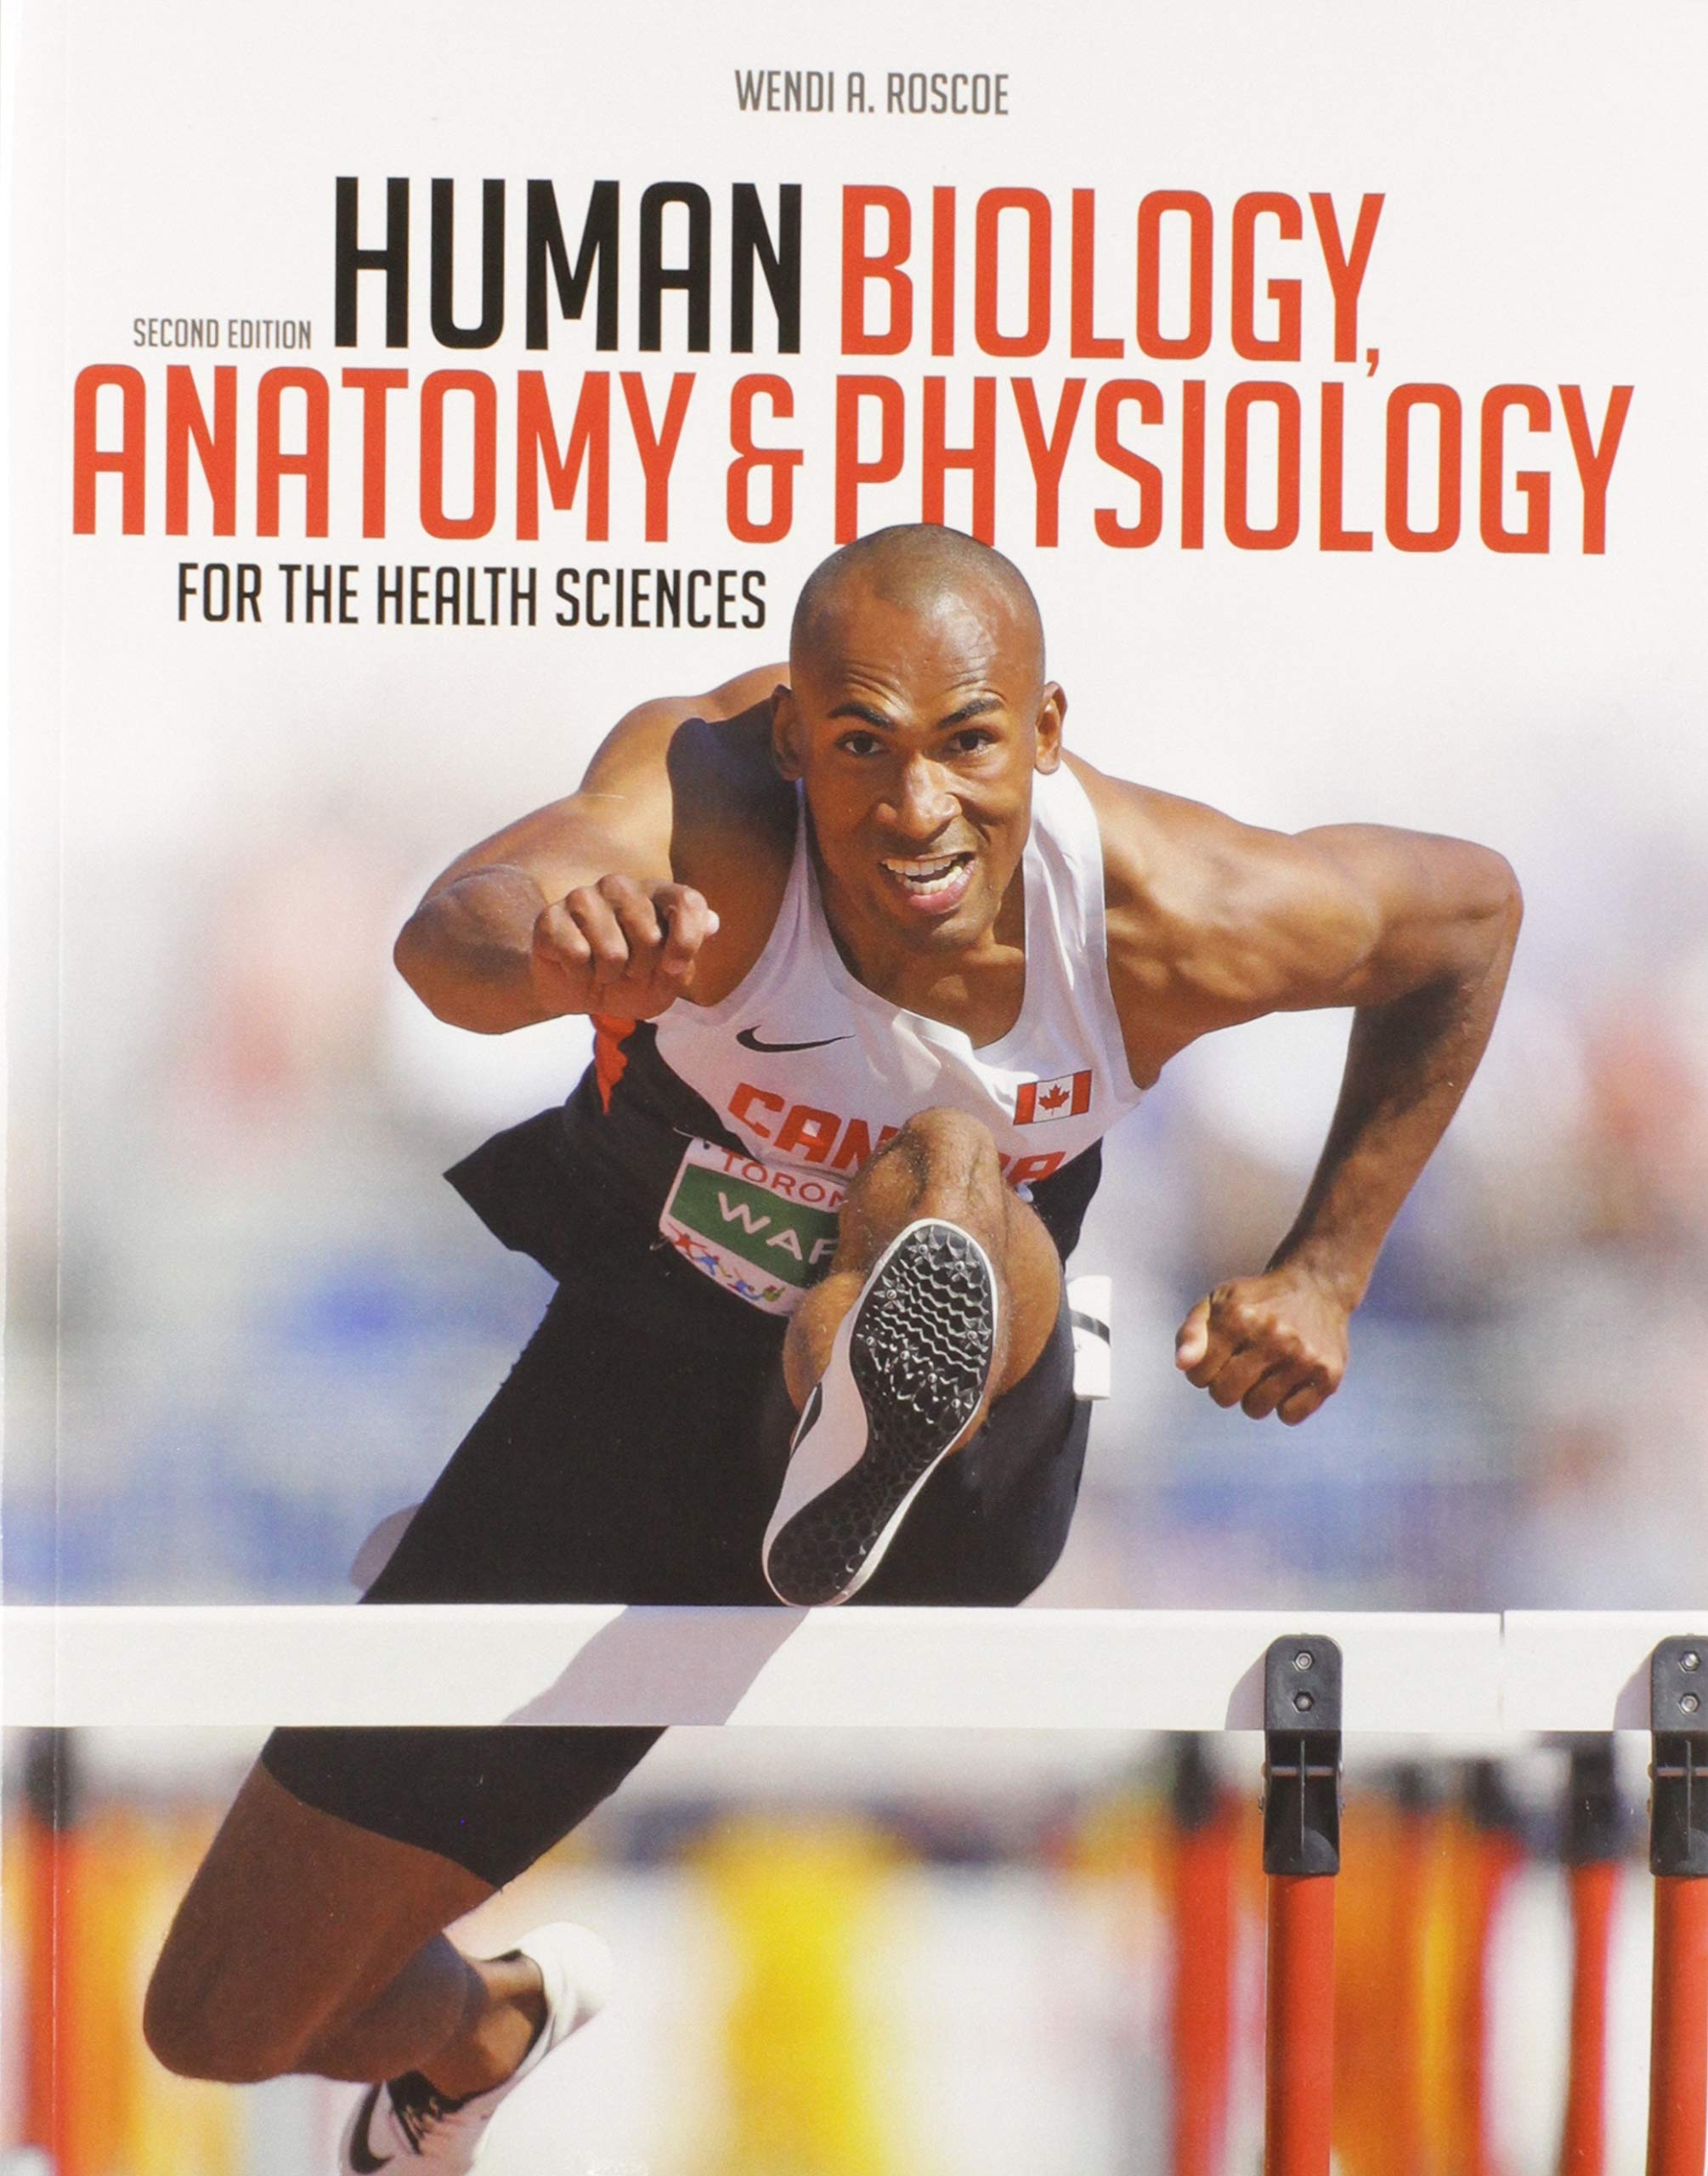 Human Biology, Anatomy & Physiology for the Health Sciences 2nd Edition